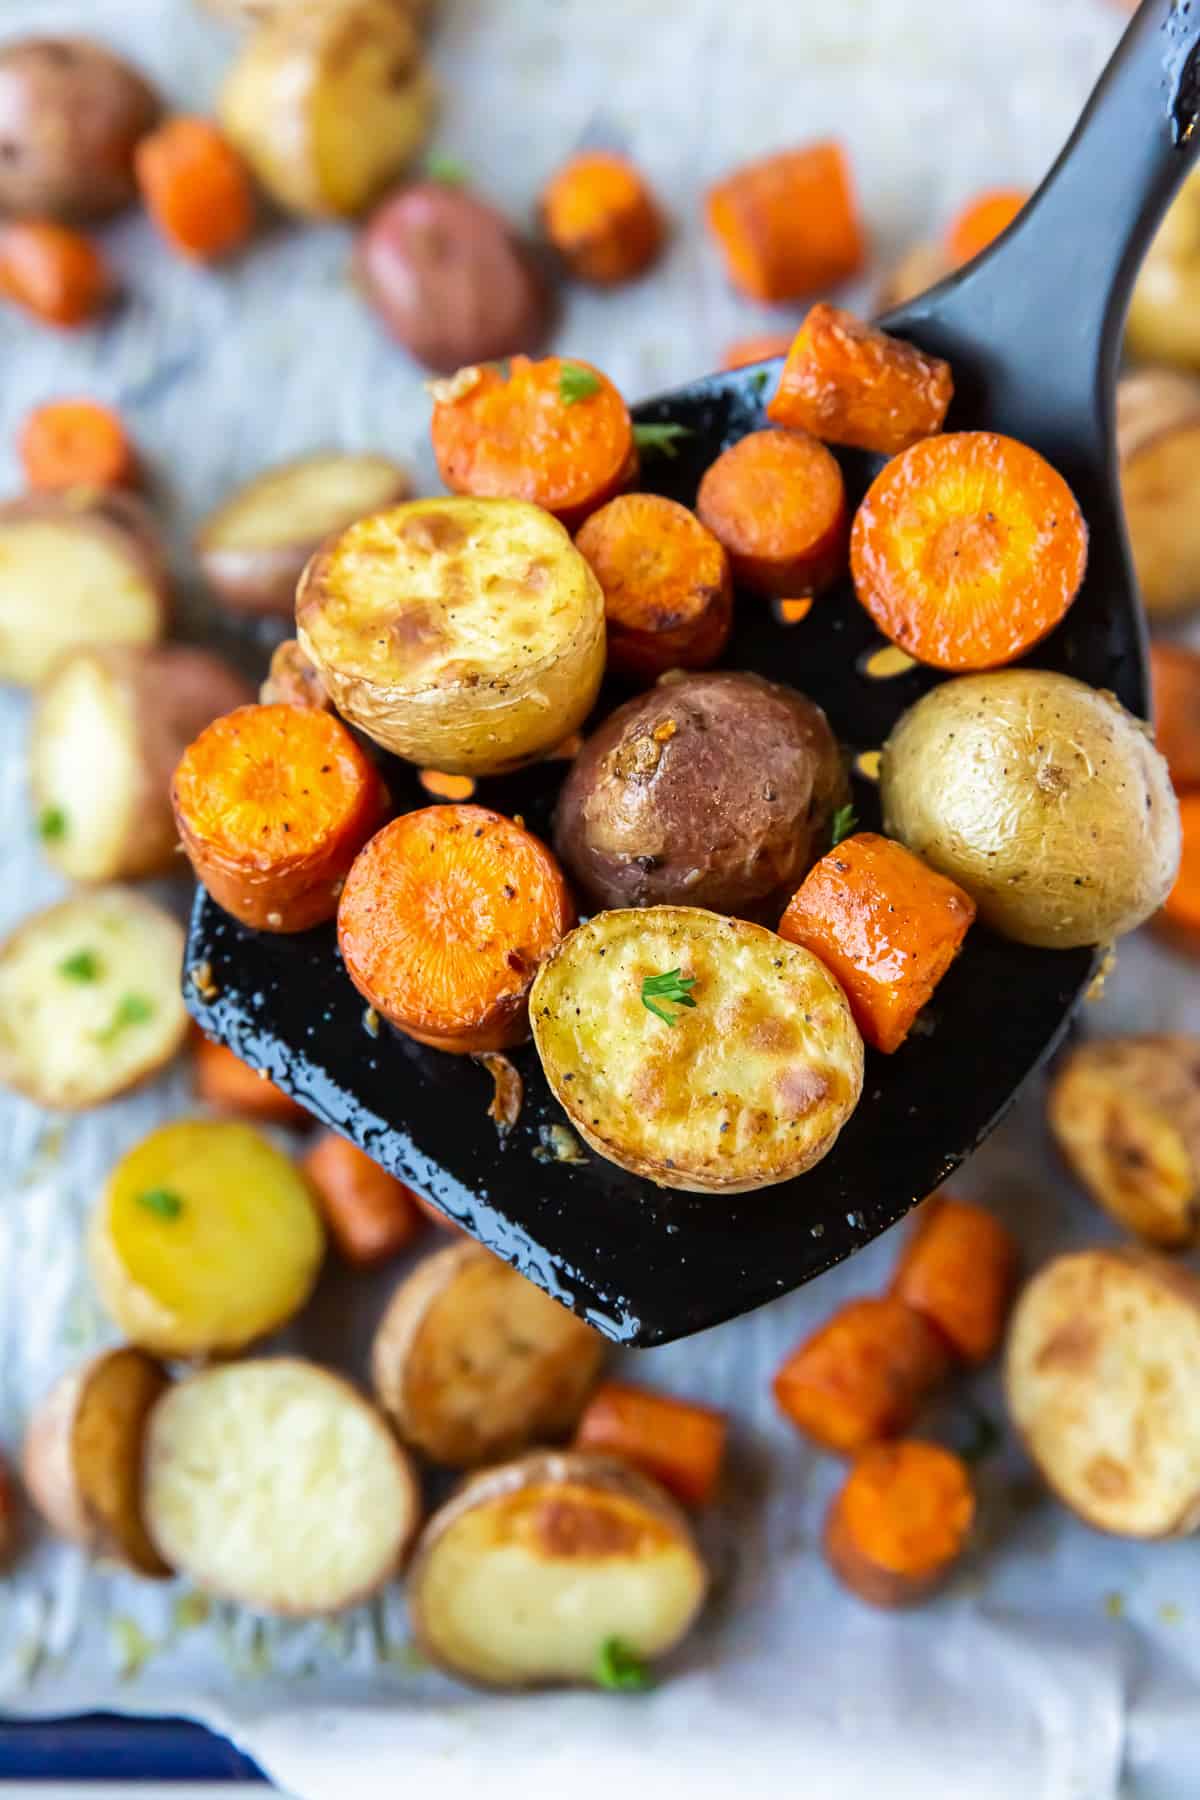 A large black spatula lifts roasted carrots and potatoes from a baking sheet.